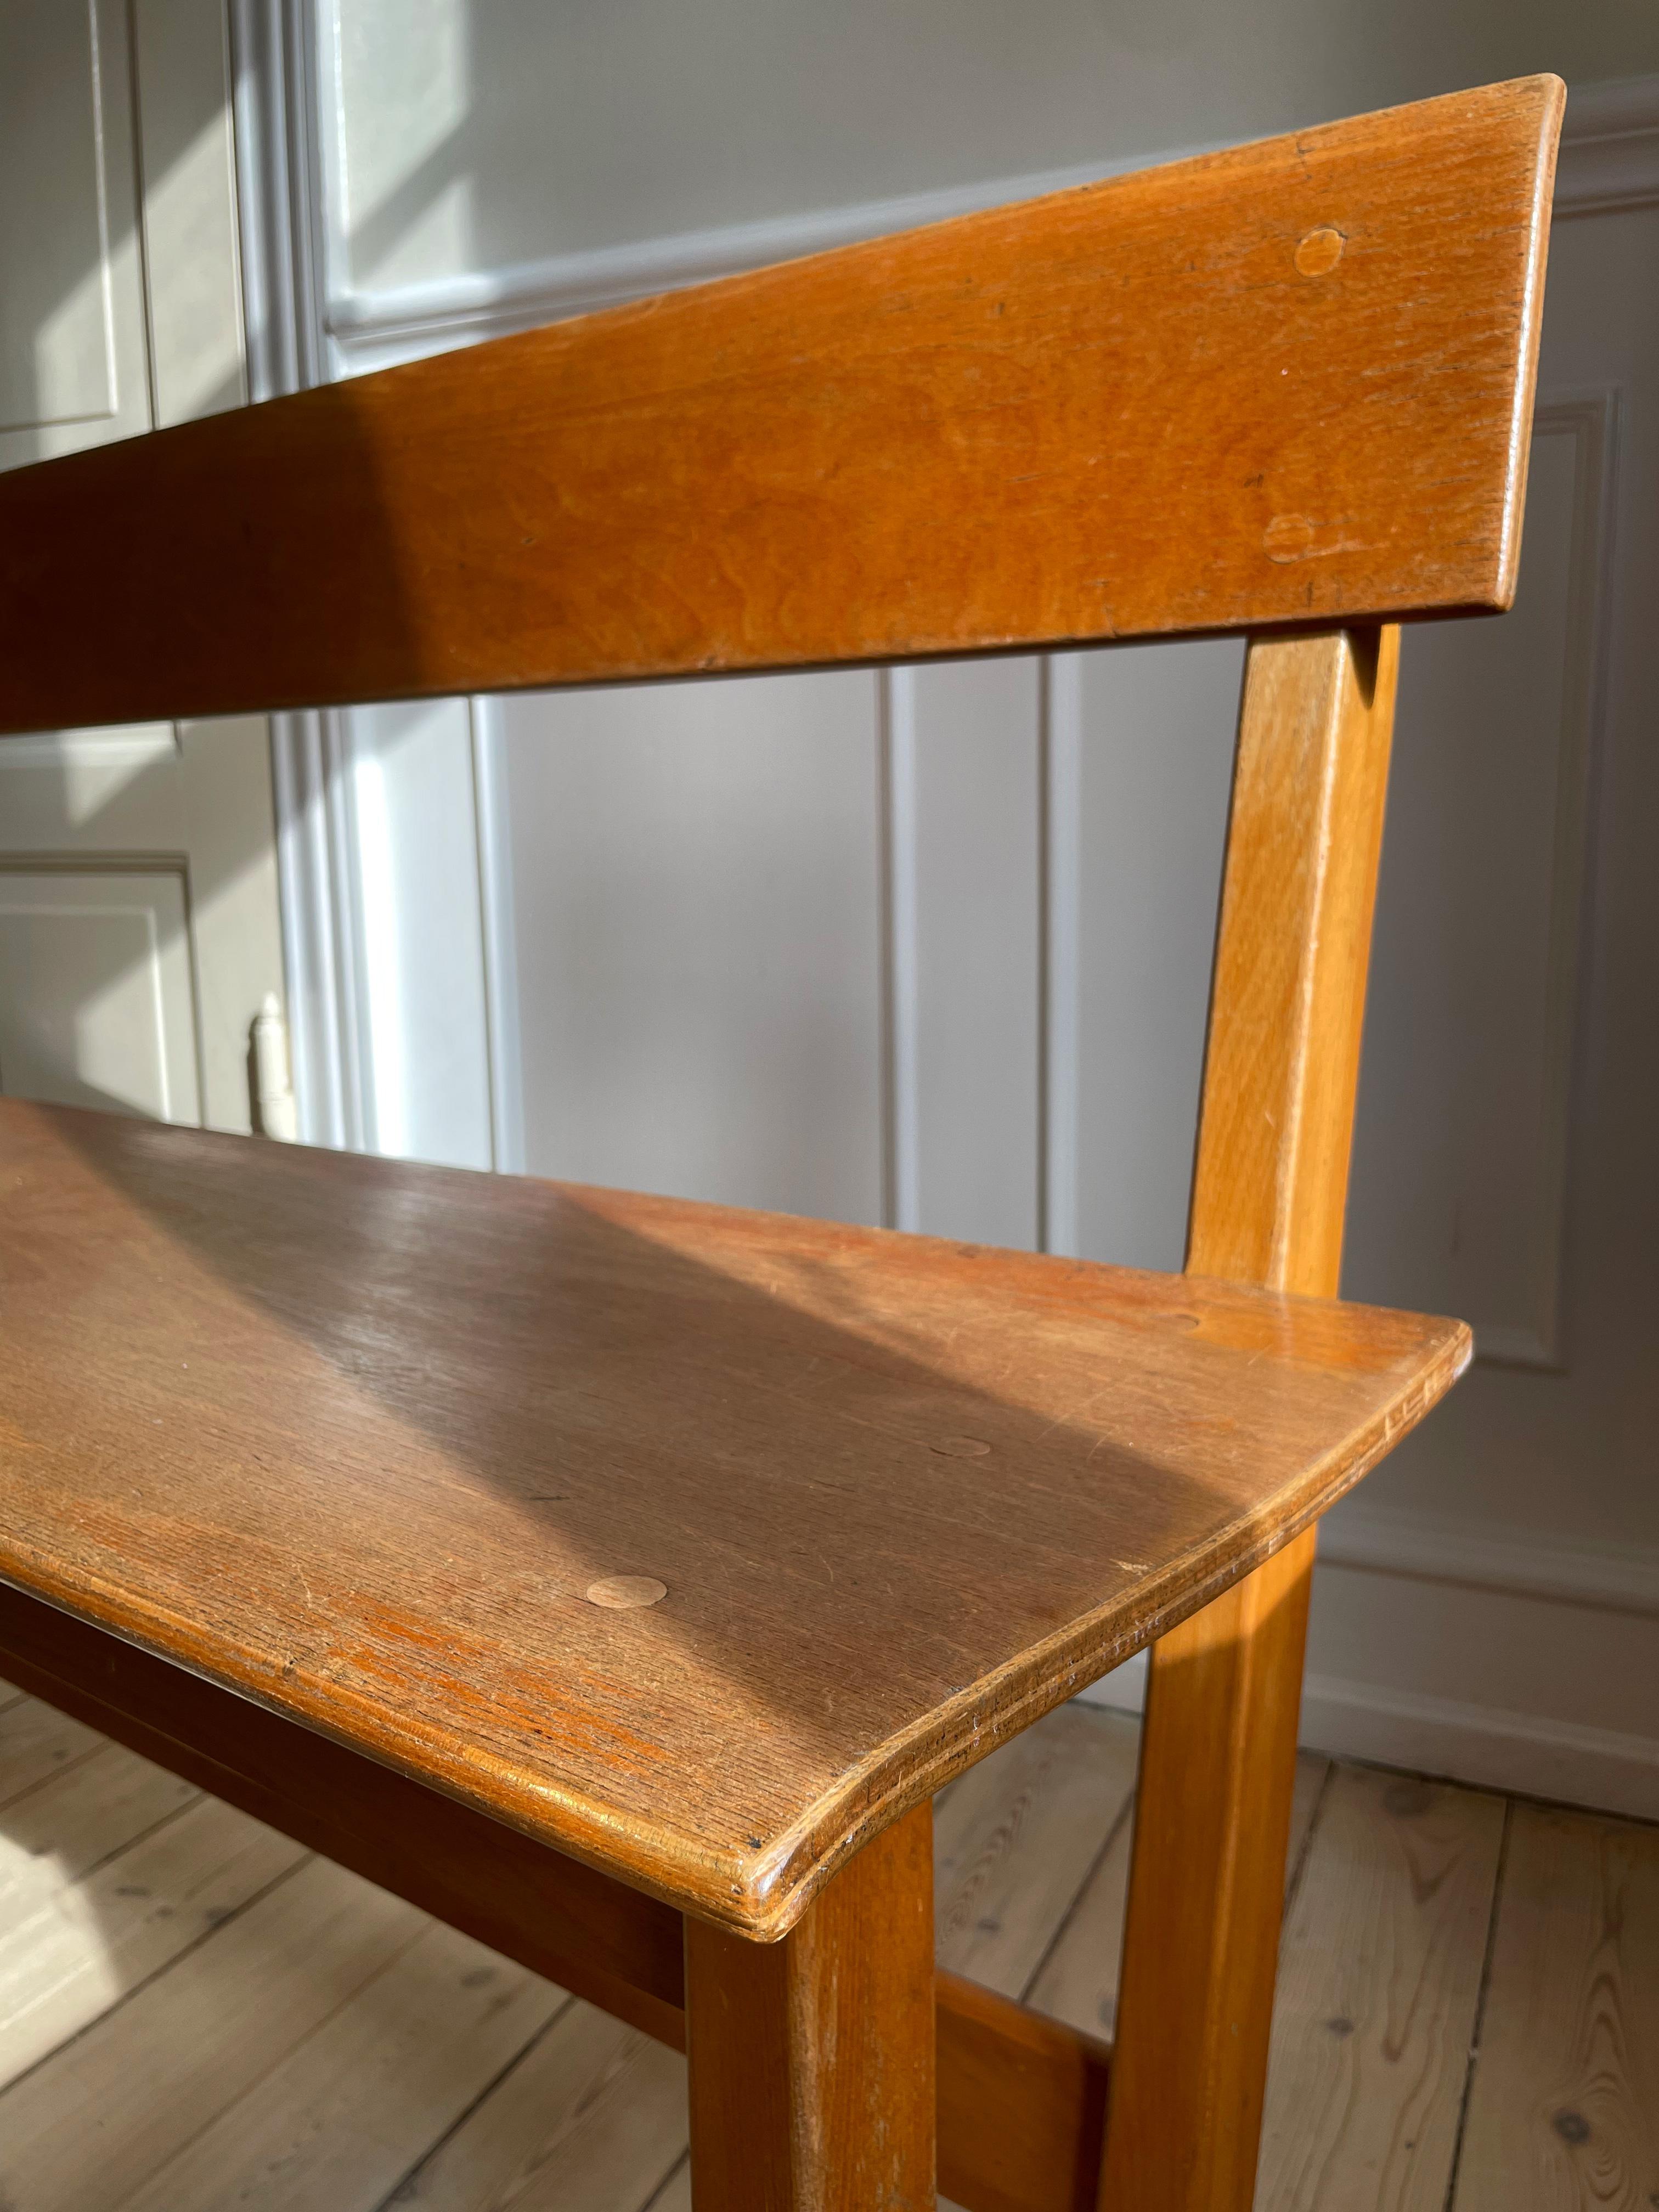 Danish Modern Hand-Crafted Wooden Bench, 1950s For Sale 12